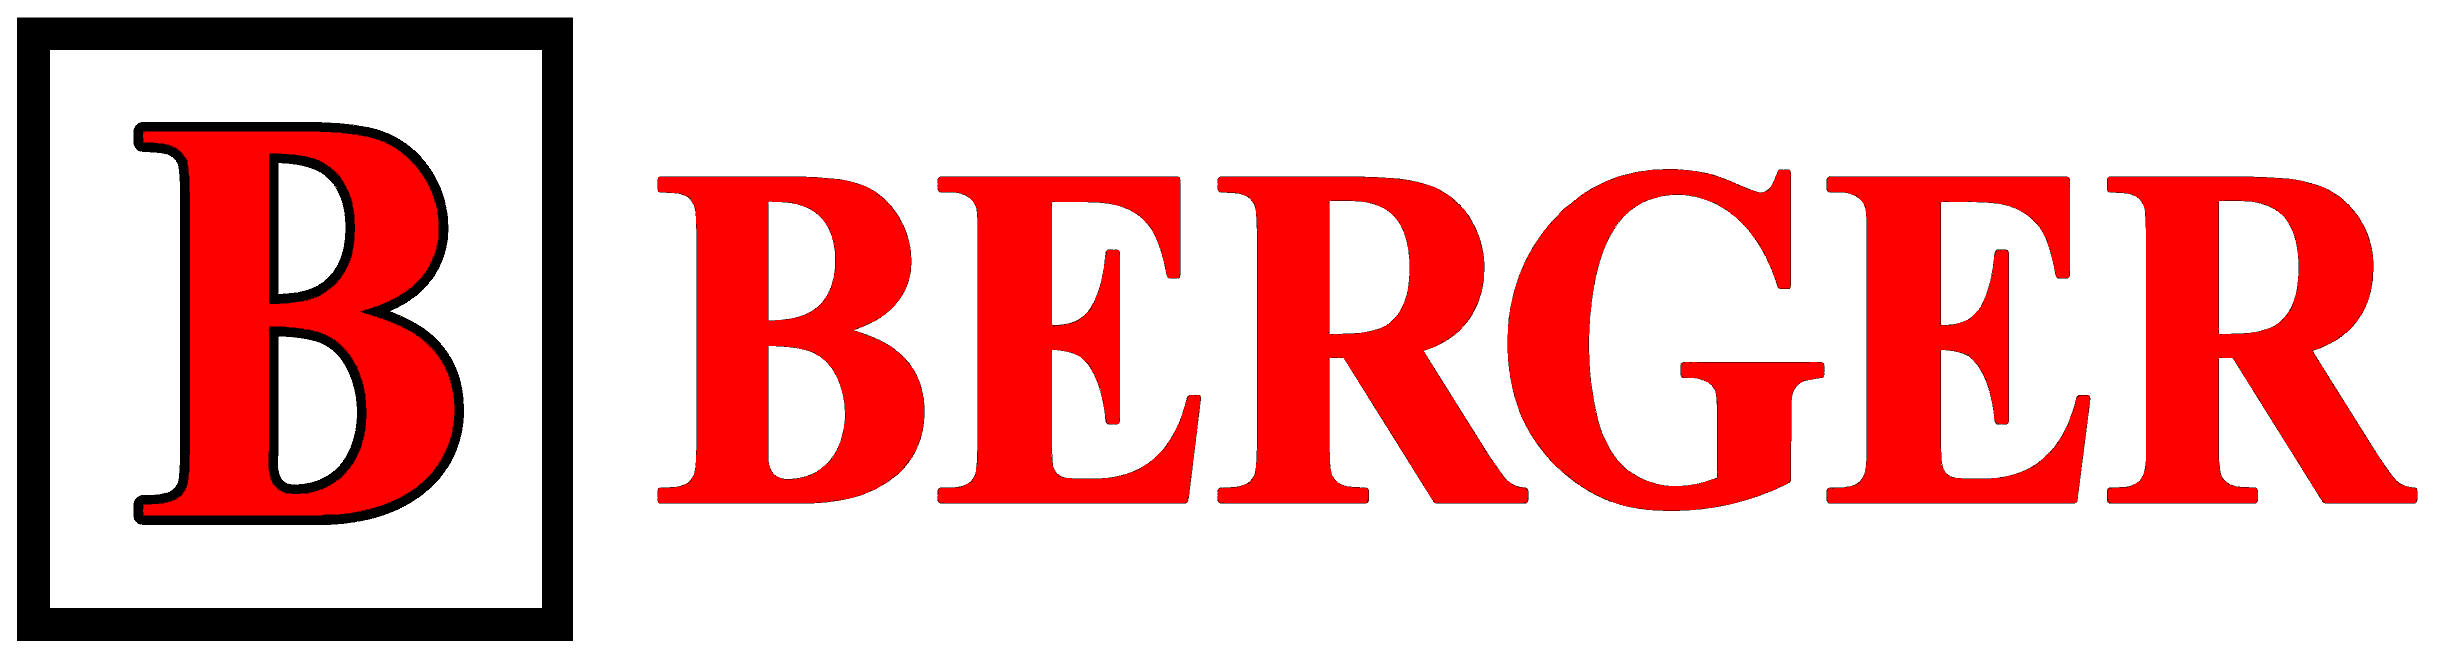 B berger logo on a white background.